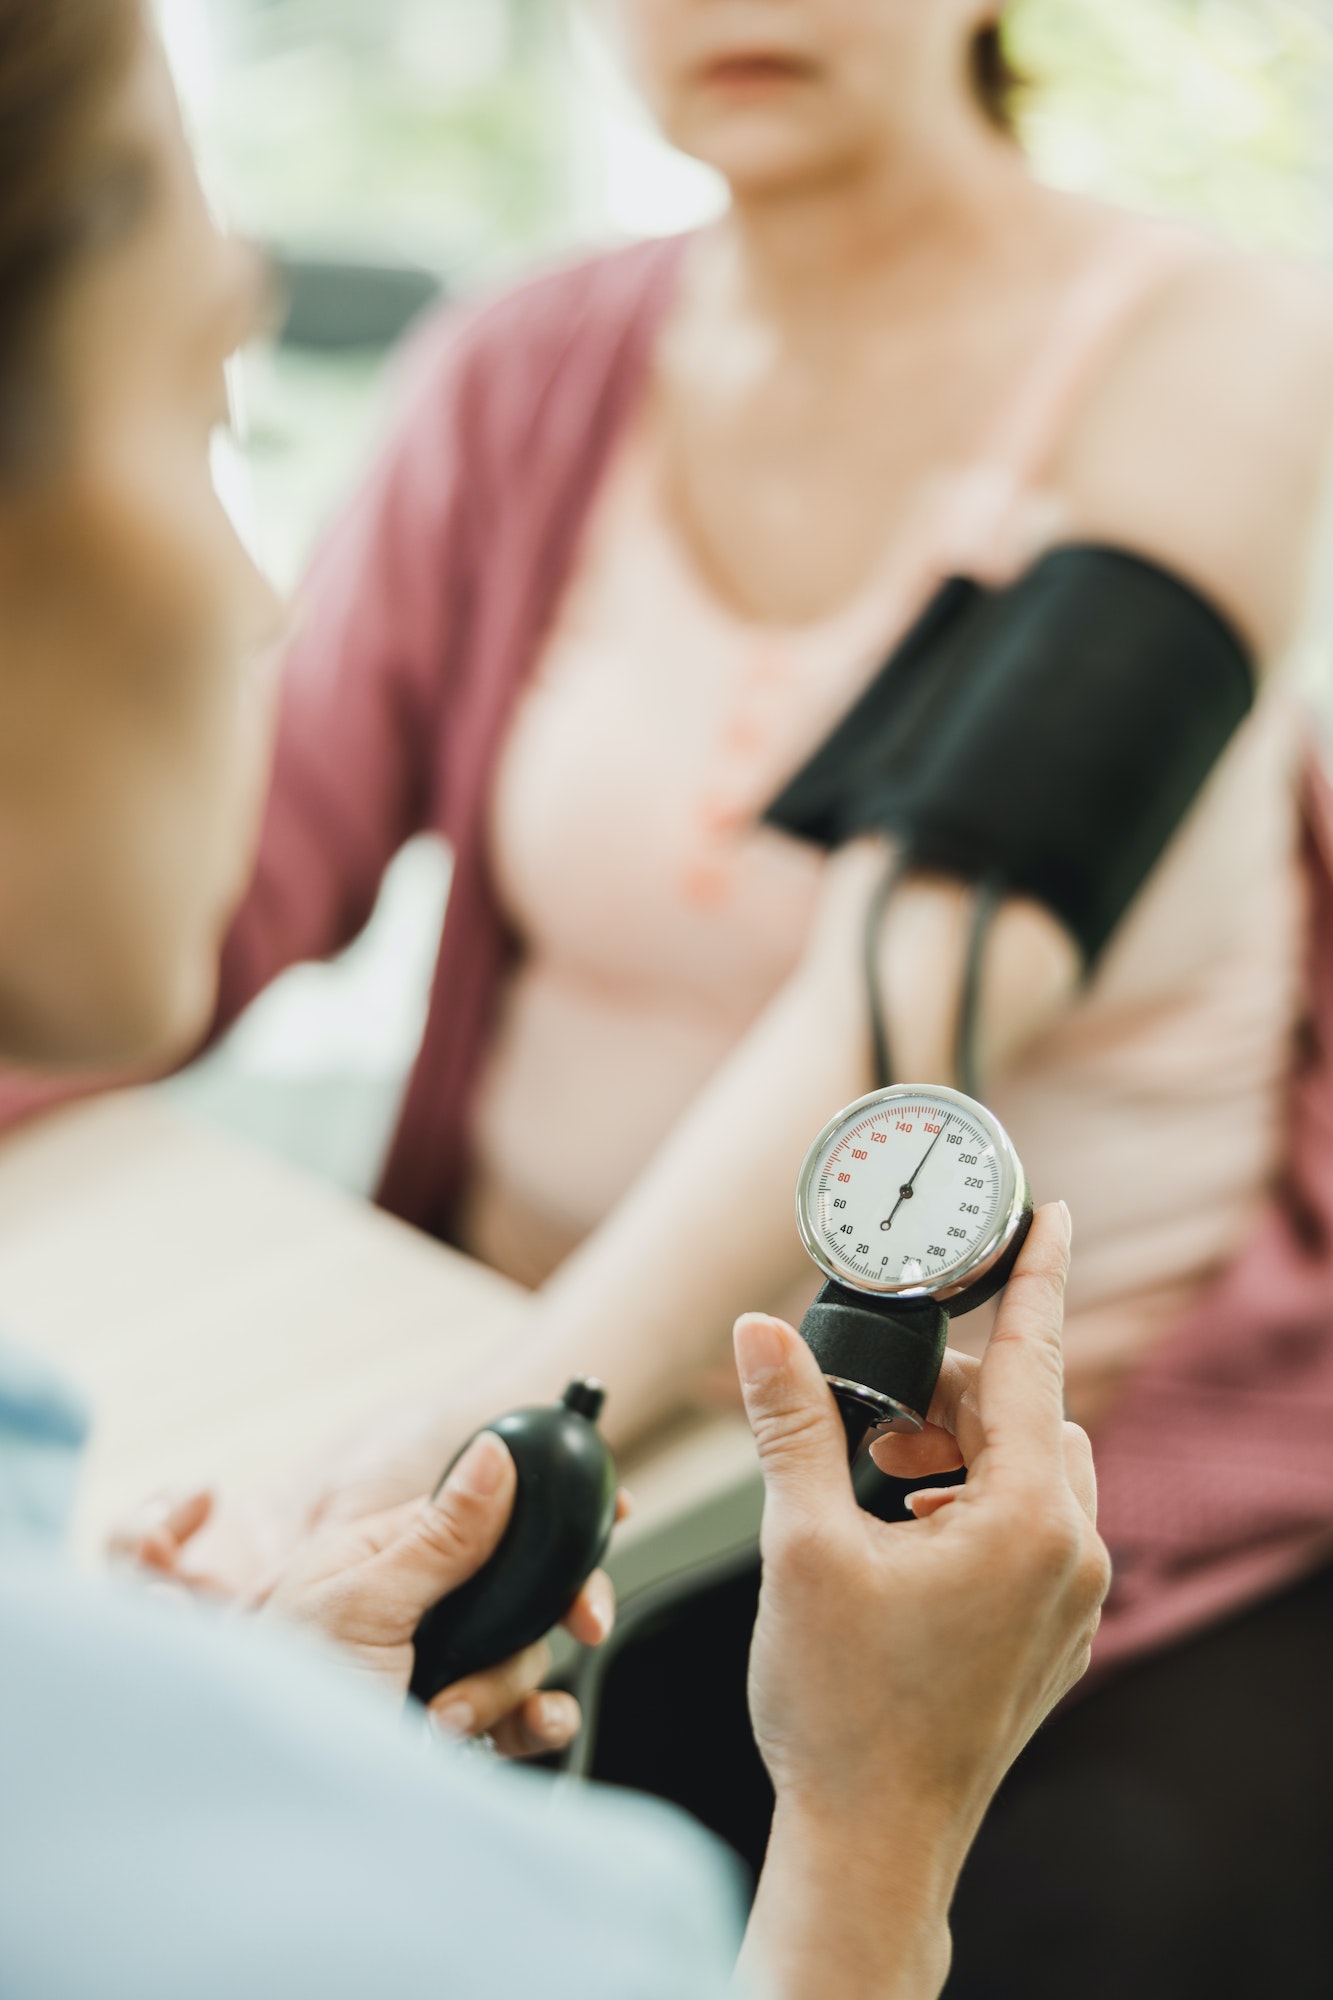 Close-Up Of A Checking The Blood Pressure